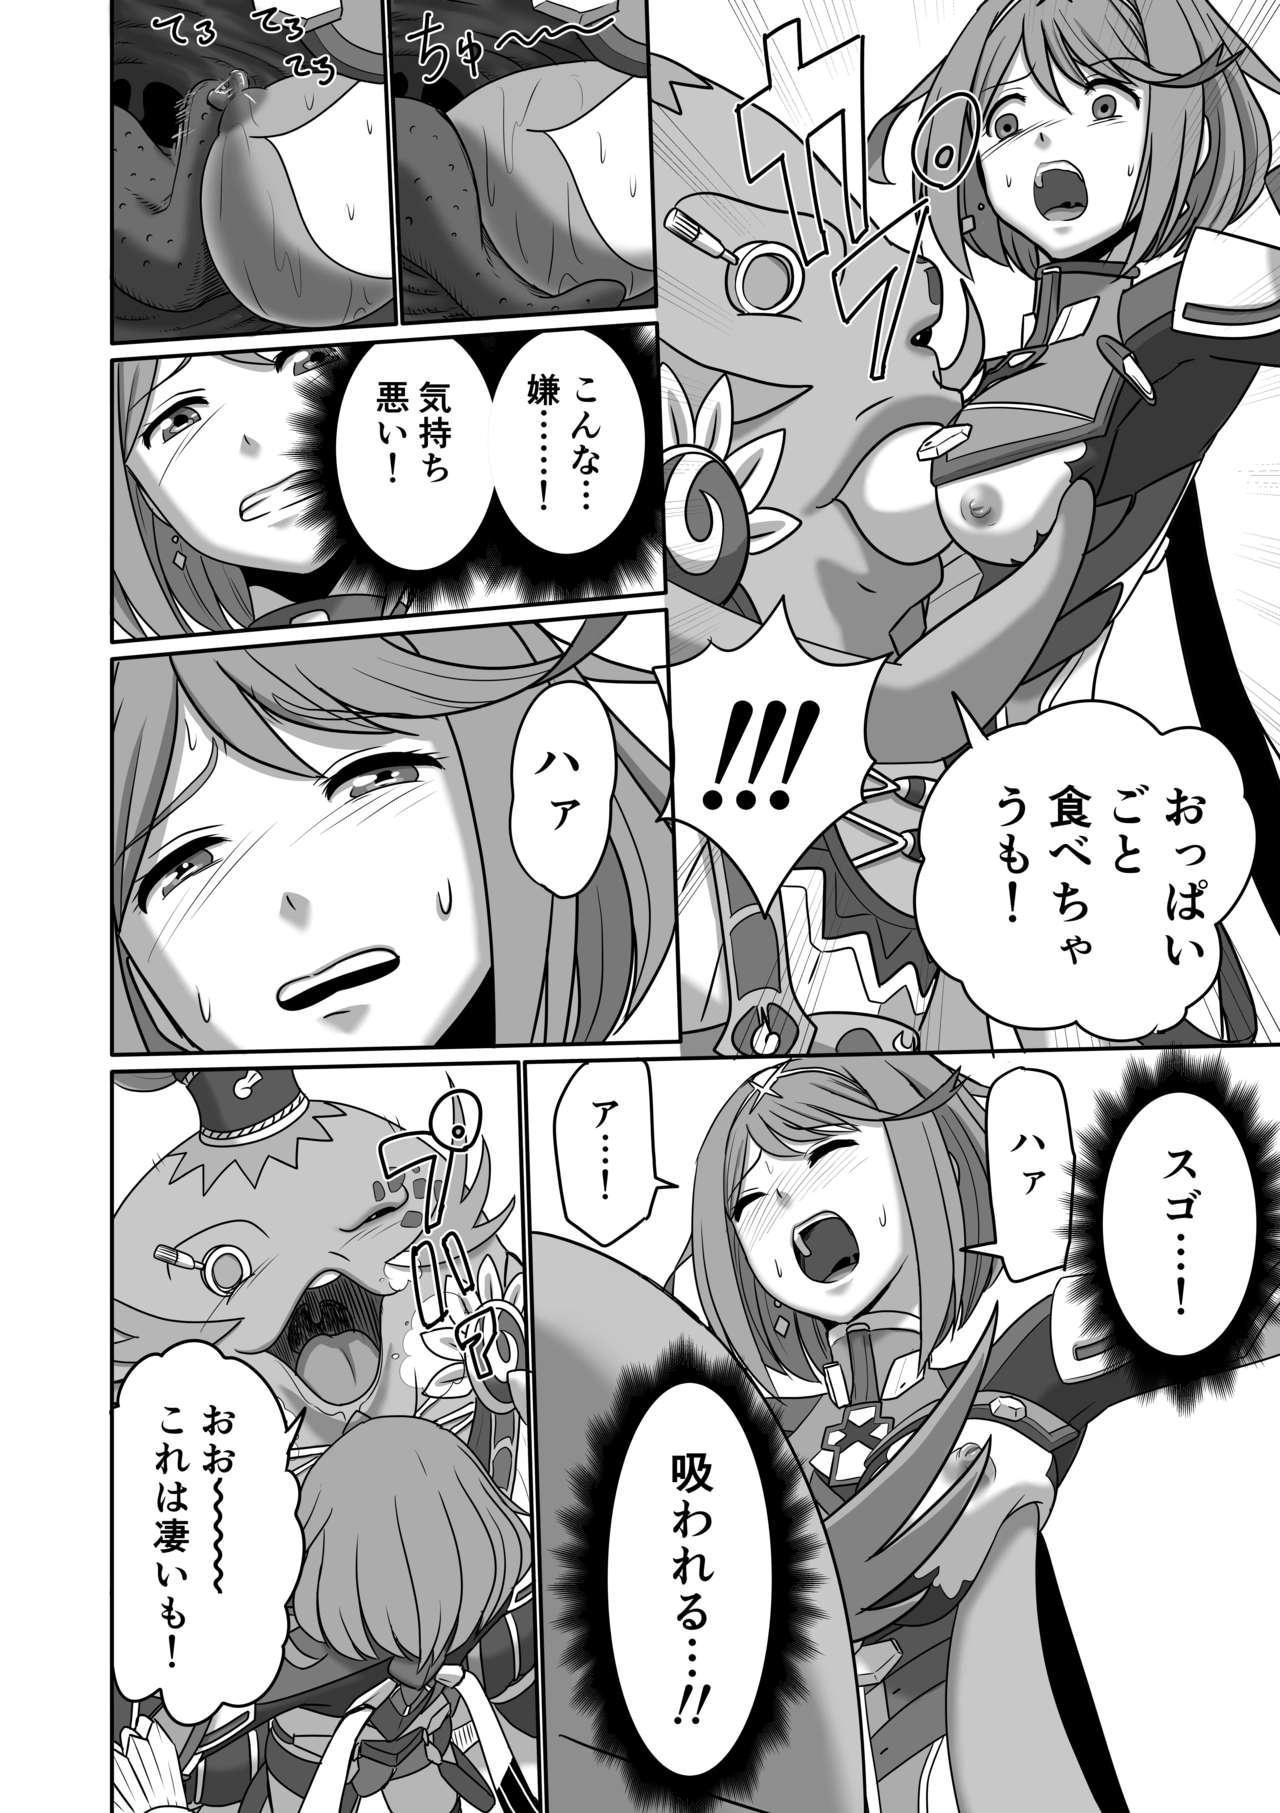 Gagging BLADE SET DX - Xenoblade chronicles 2 Pink Pussy - Page 10